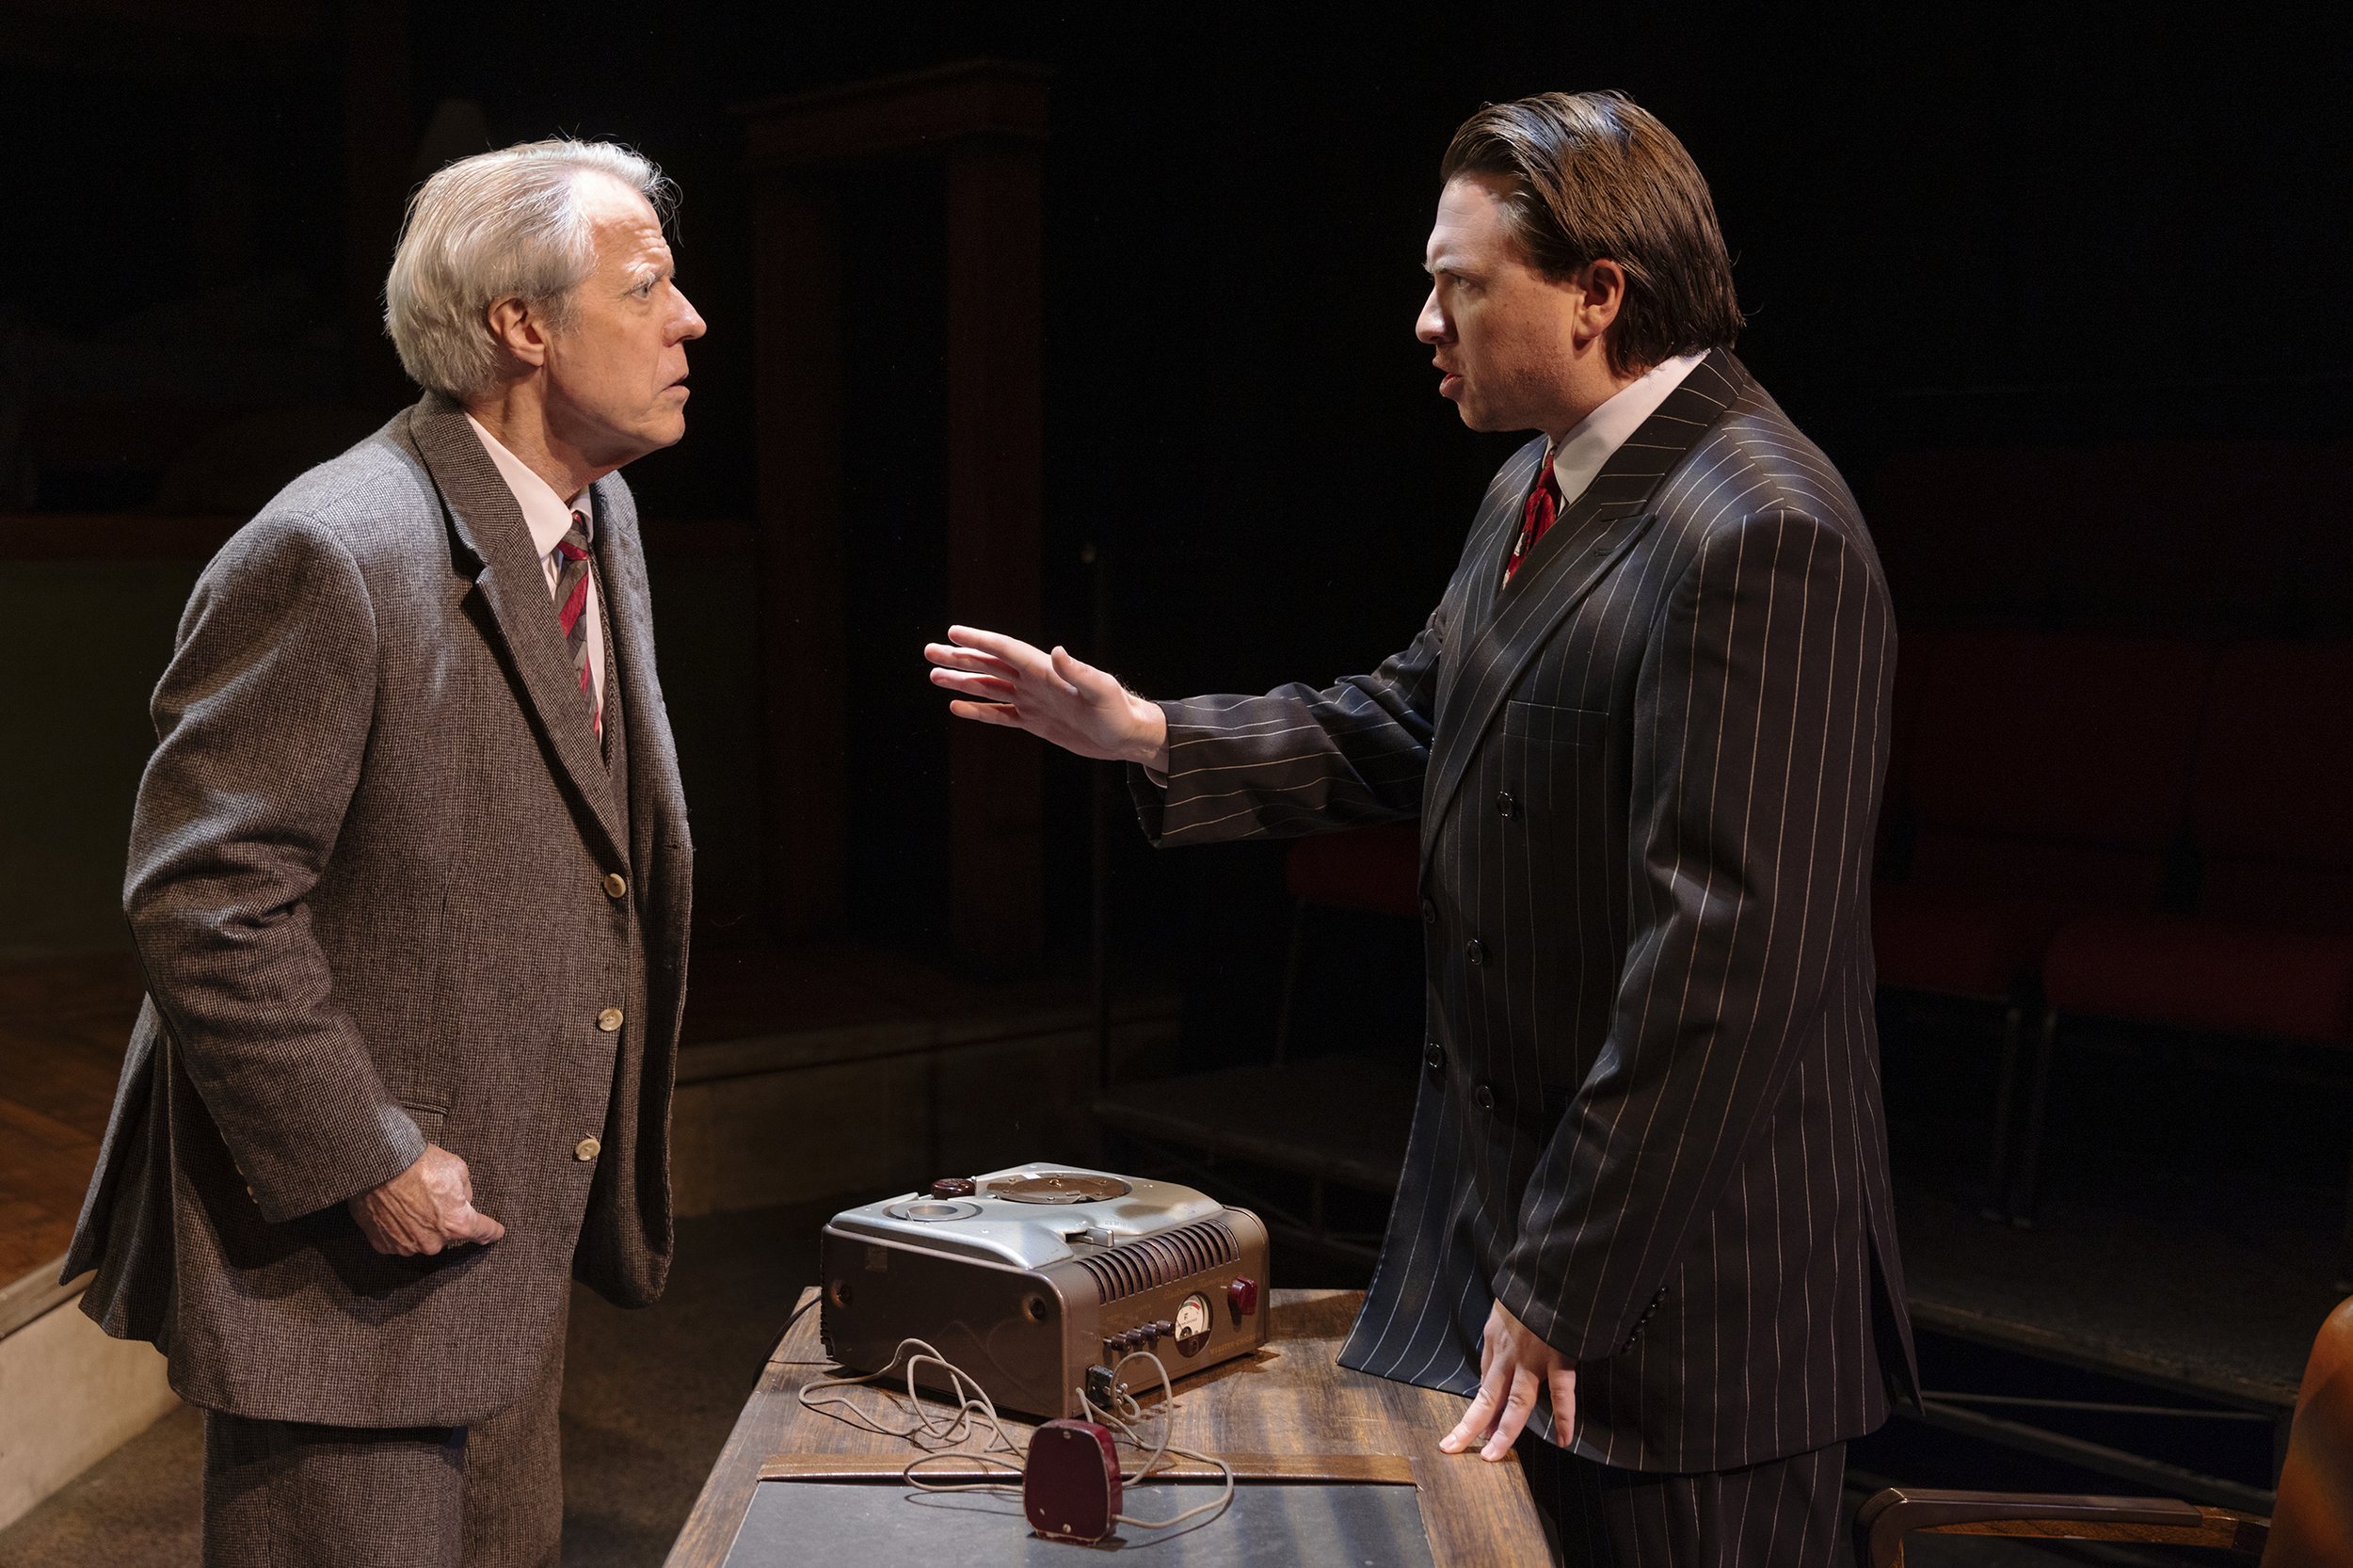 Joseph McGrath as Willy Loman and Aaron Shand as Howard Wagner. Photo by Tim Fuller.